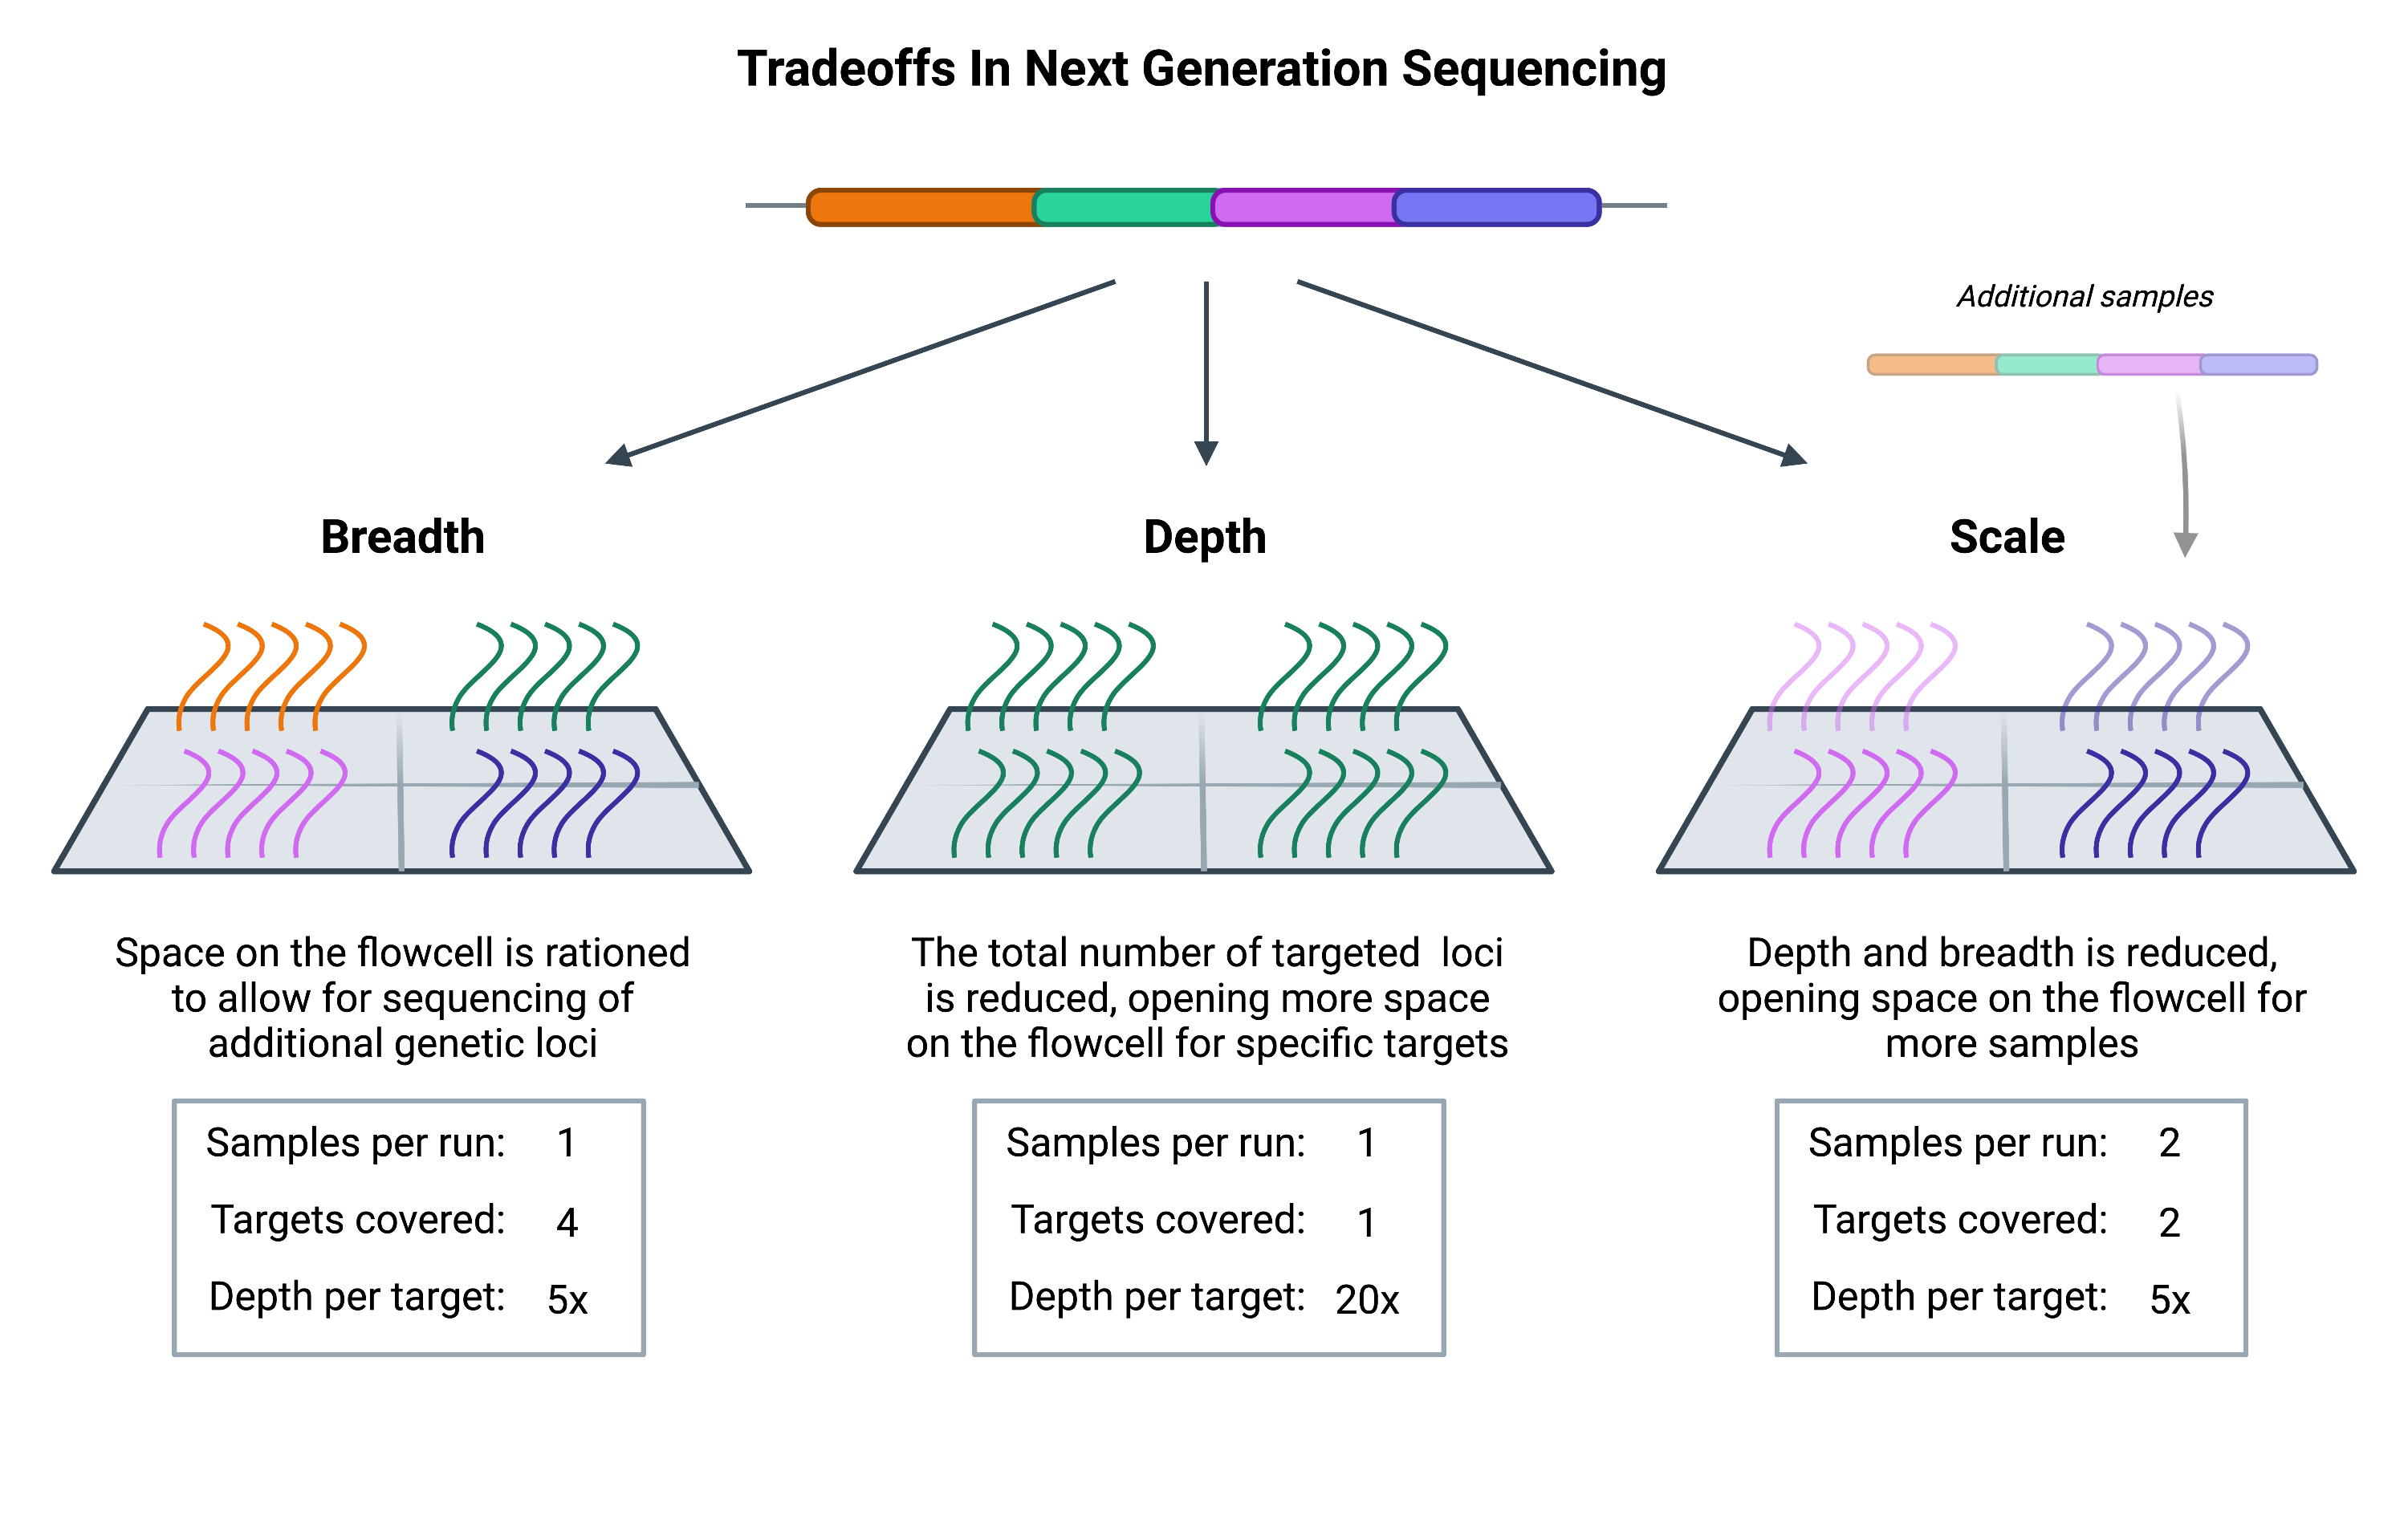 Image showing the consideration when balancing breadth, depth, and scale in NGS sequencing. 